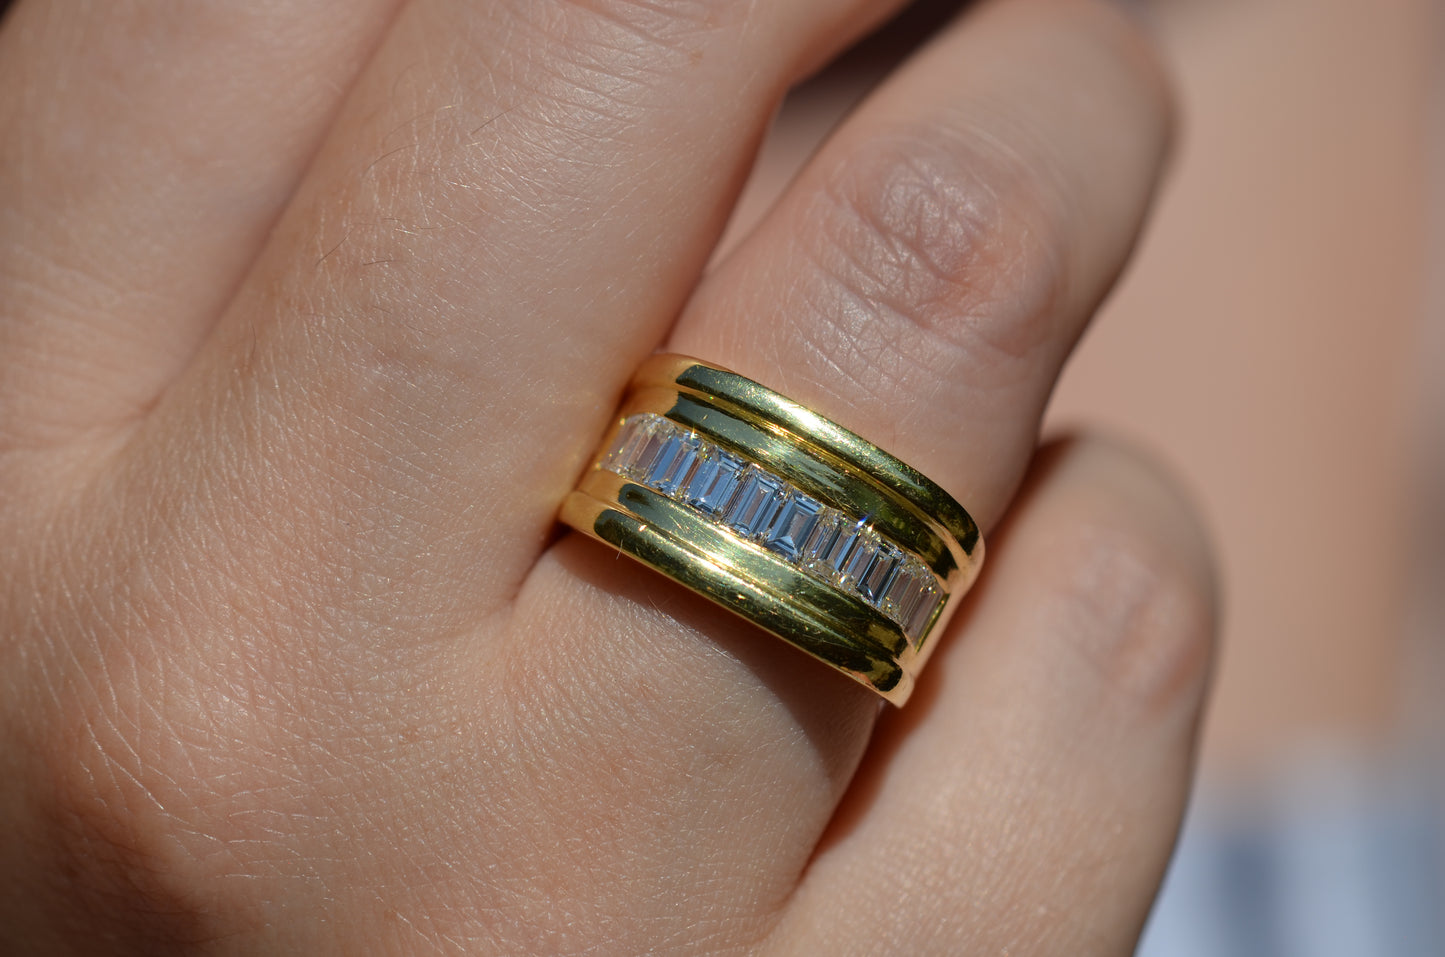 Bold Channel Baguette Ring